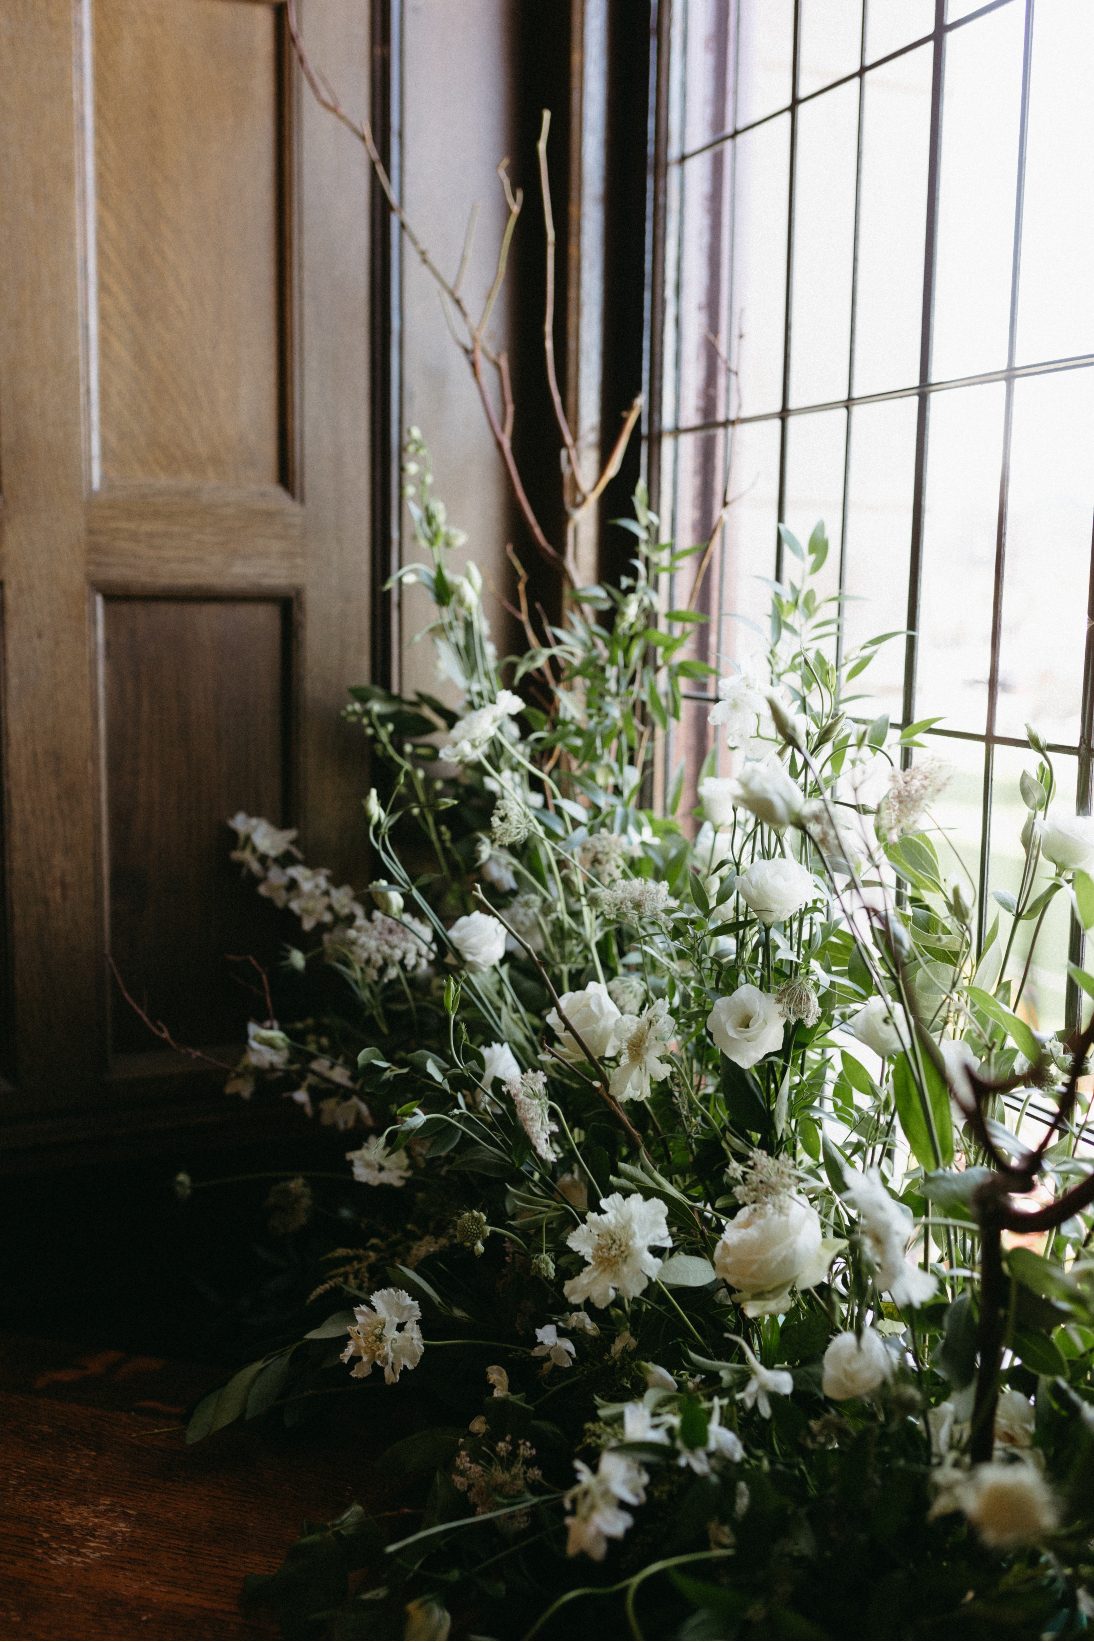 A close up of the ceremony arrangements, full of lush greens and crisp white blooms.